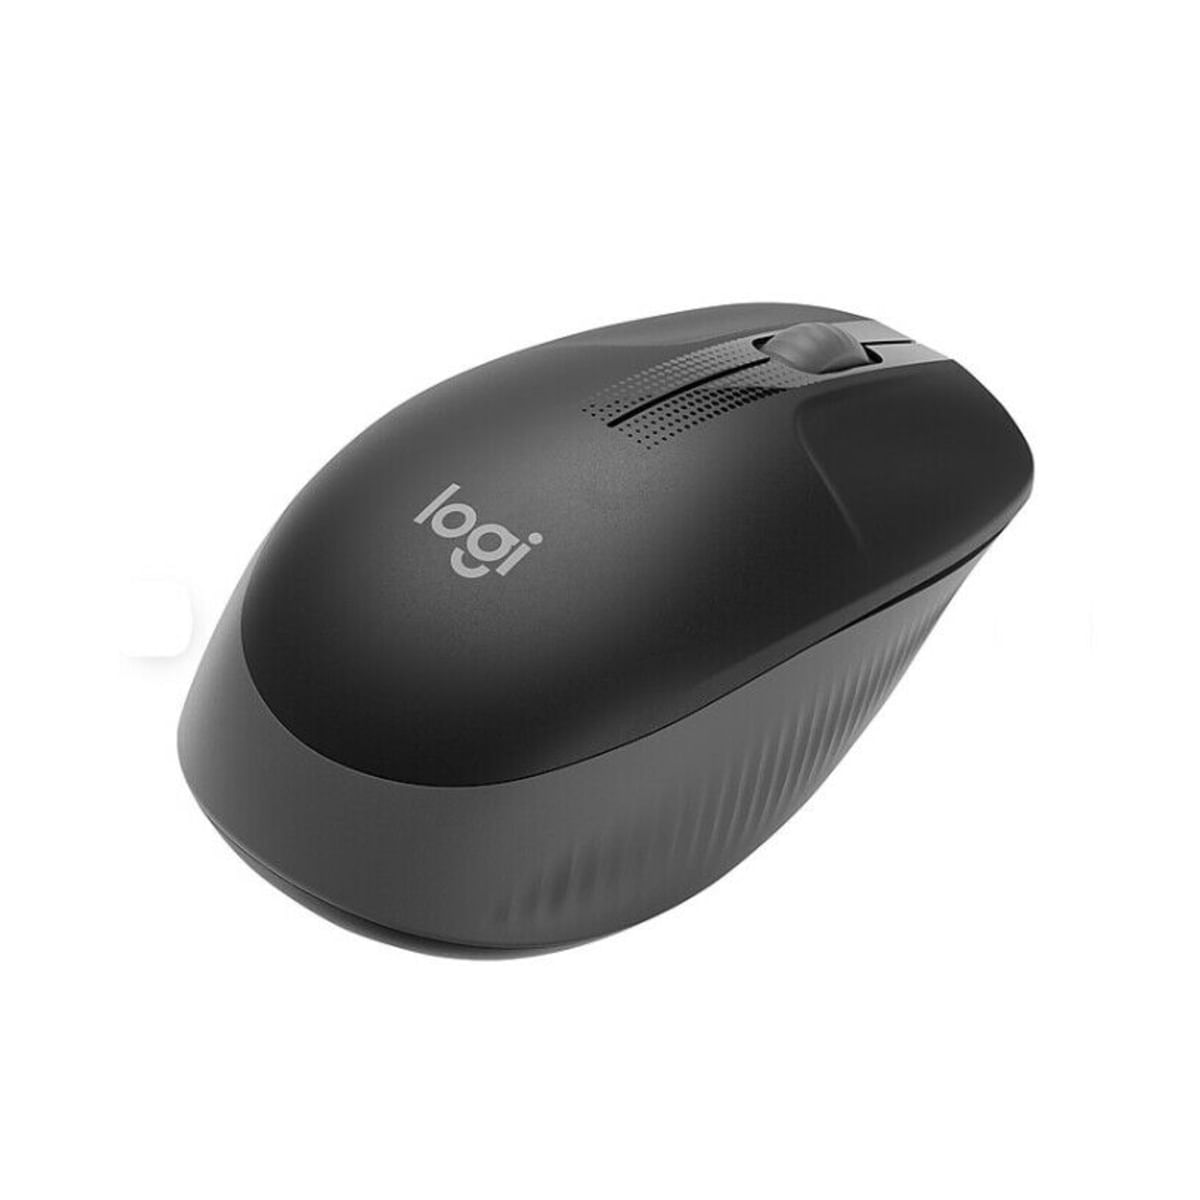 Mouse Logitech M190 Wireless Inalámbrico para Pc o Laptop Gamer Plug and Play Color Negro